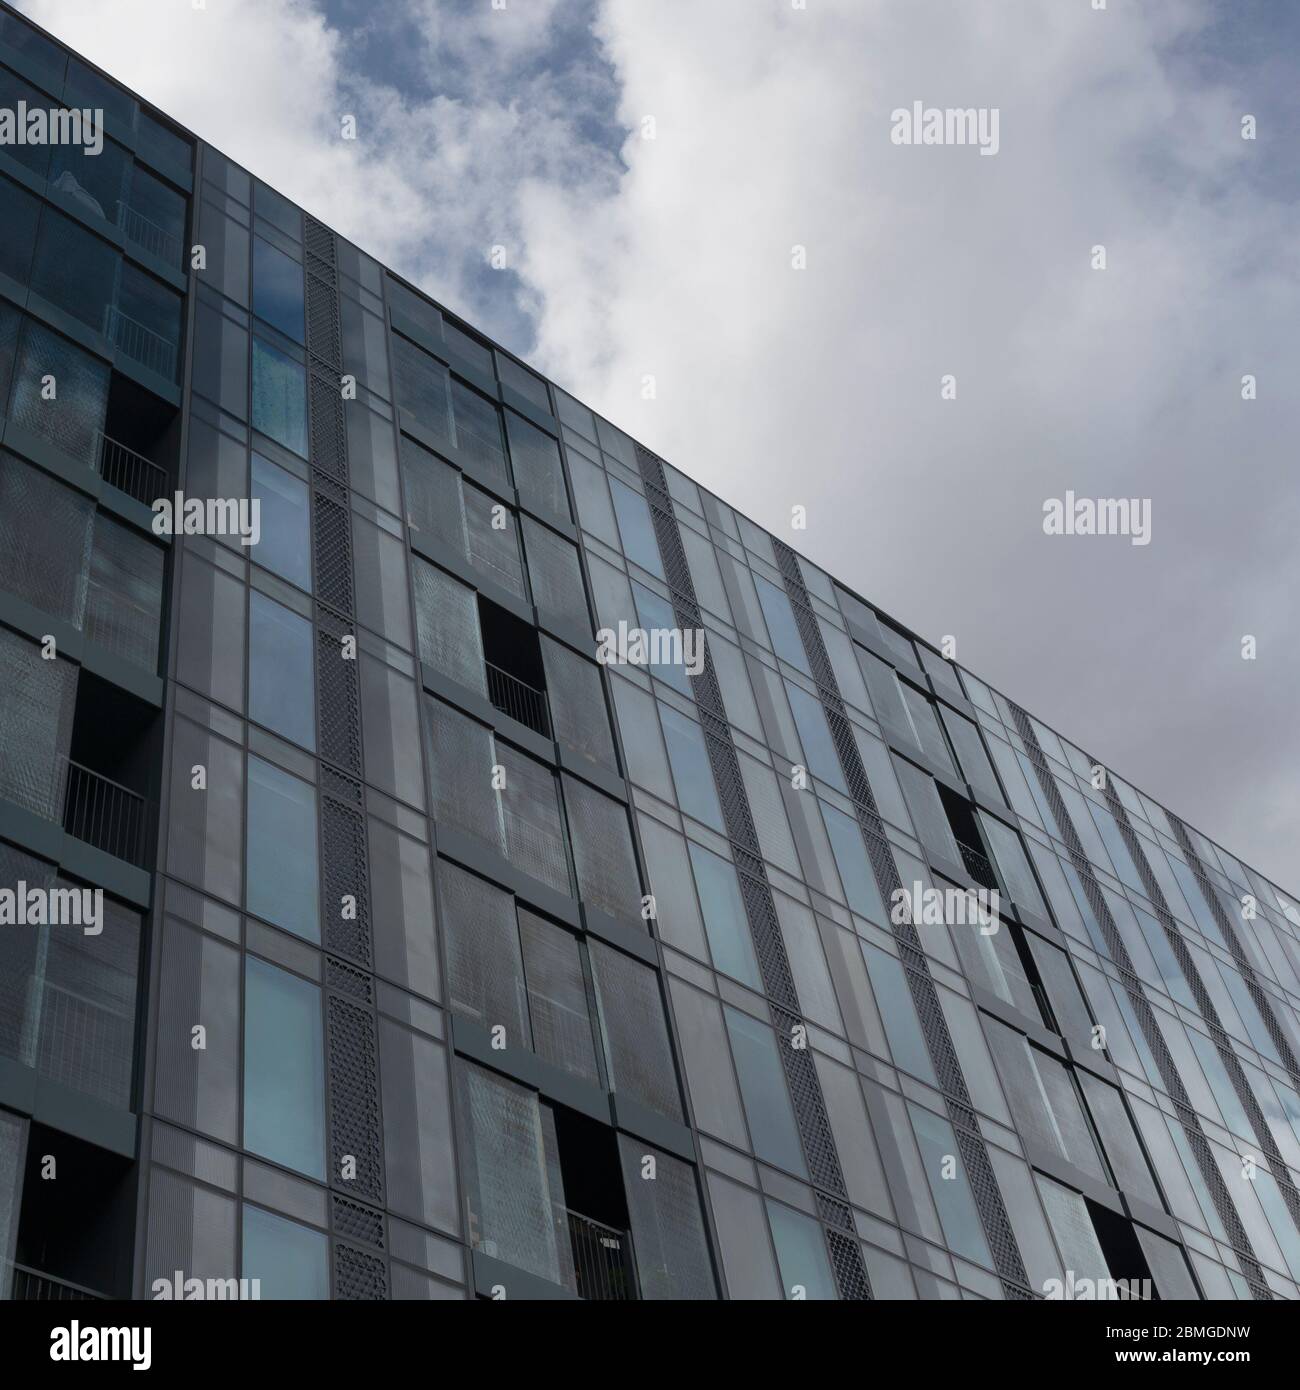 The sky reflected in the glass windowed facade of Hartley House, Bermondsey, London, England Stock Photo